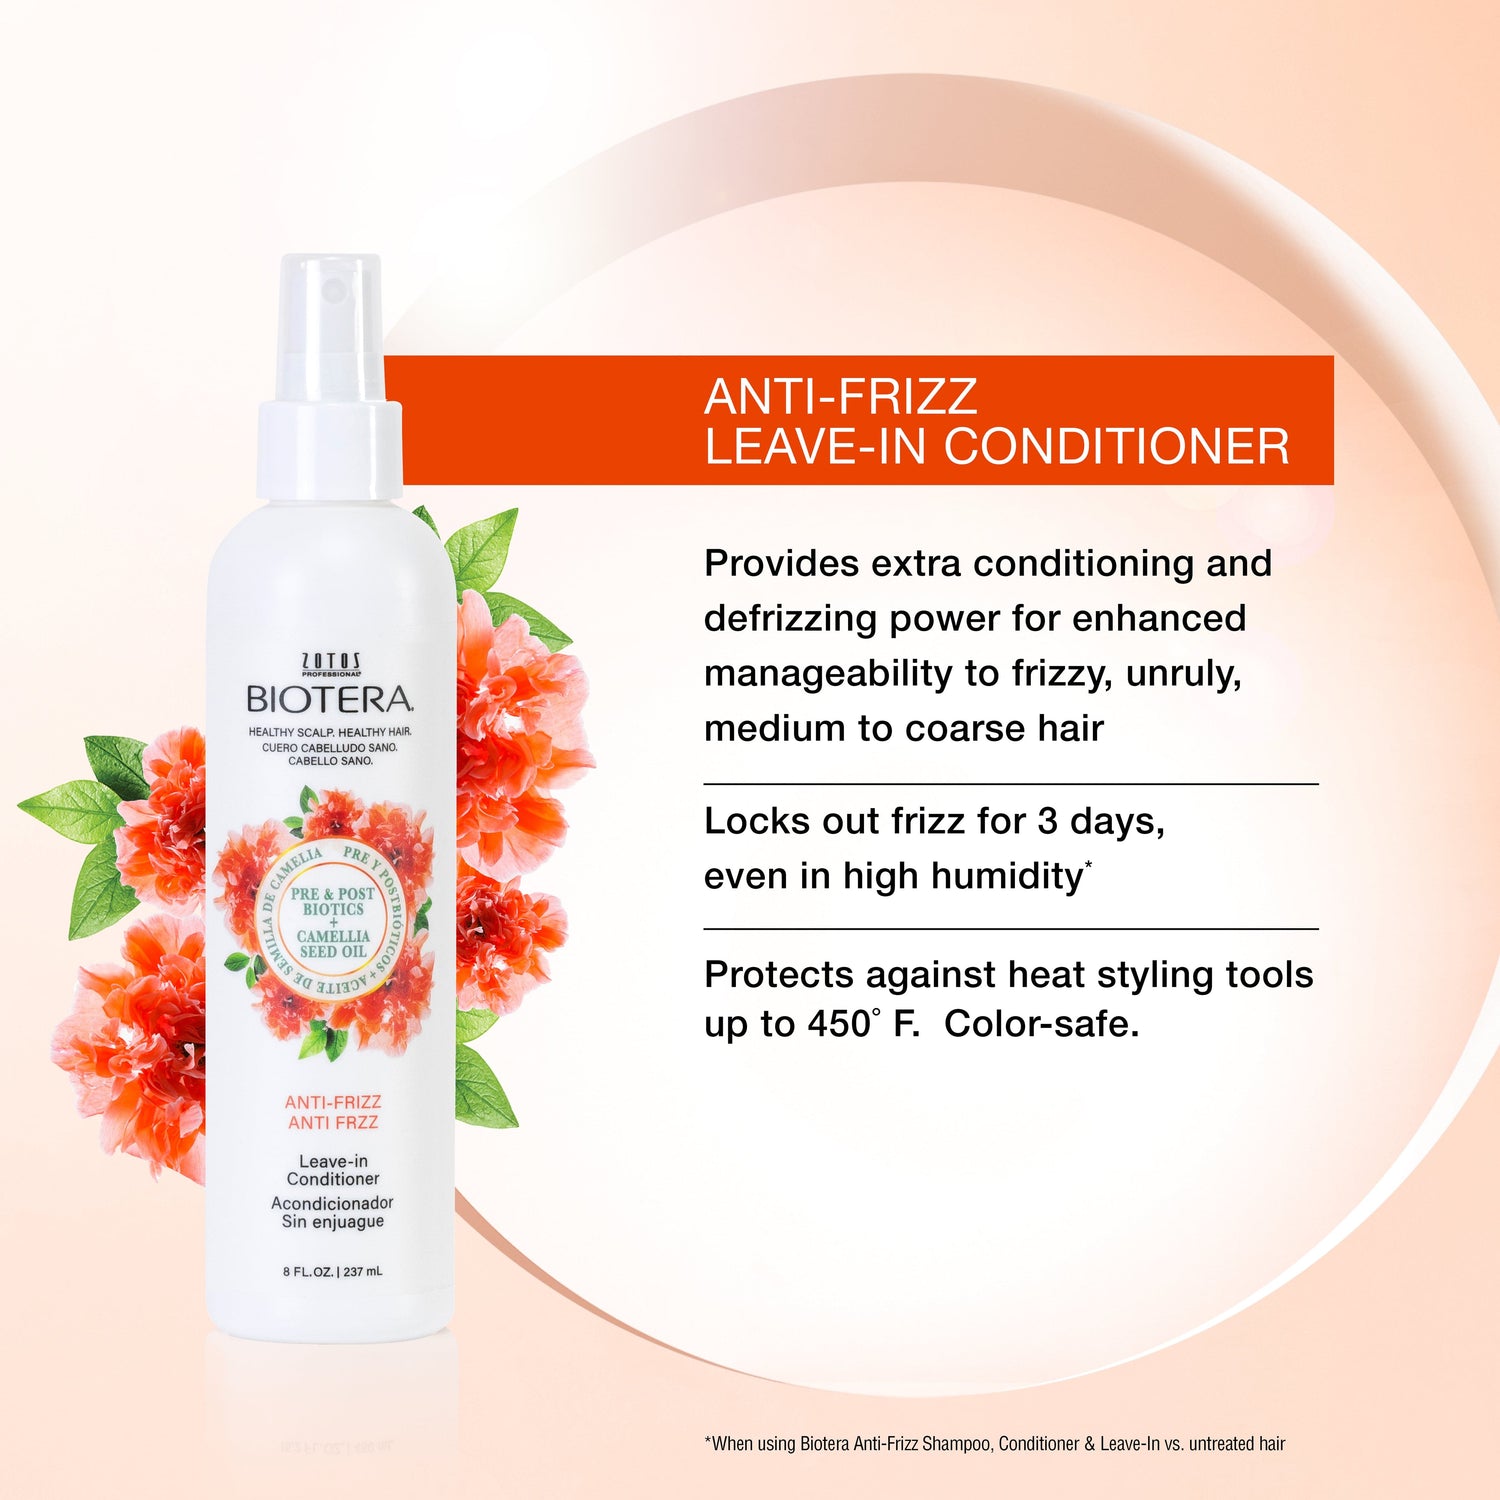 Biotera anti frizz leave in conditioner locks out frizz for 3 days even in high humidity and protects from heat styling tools.